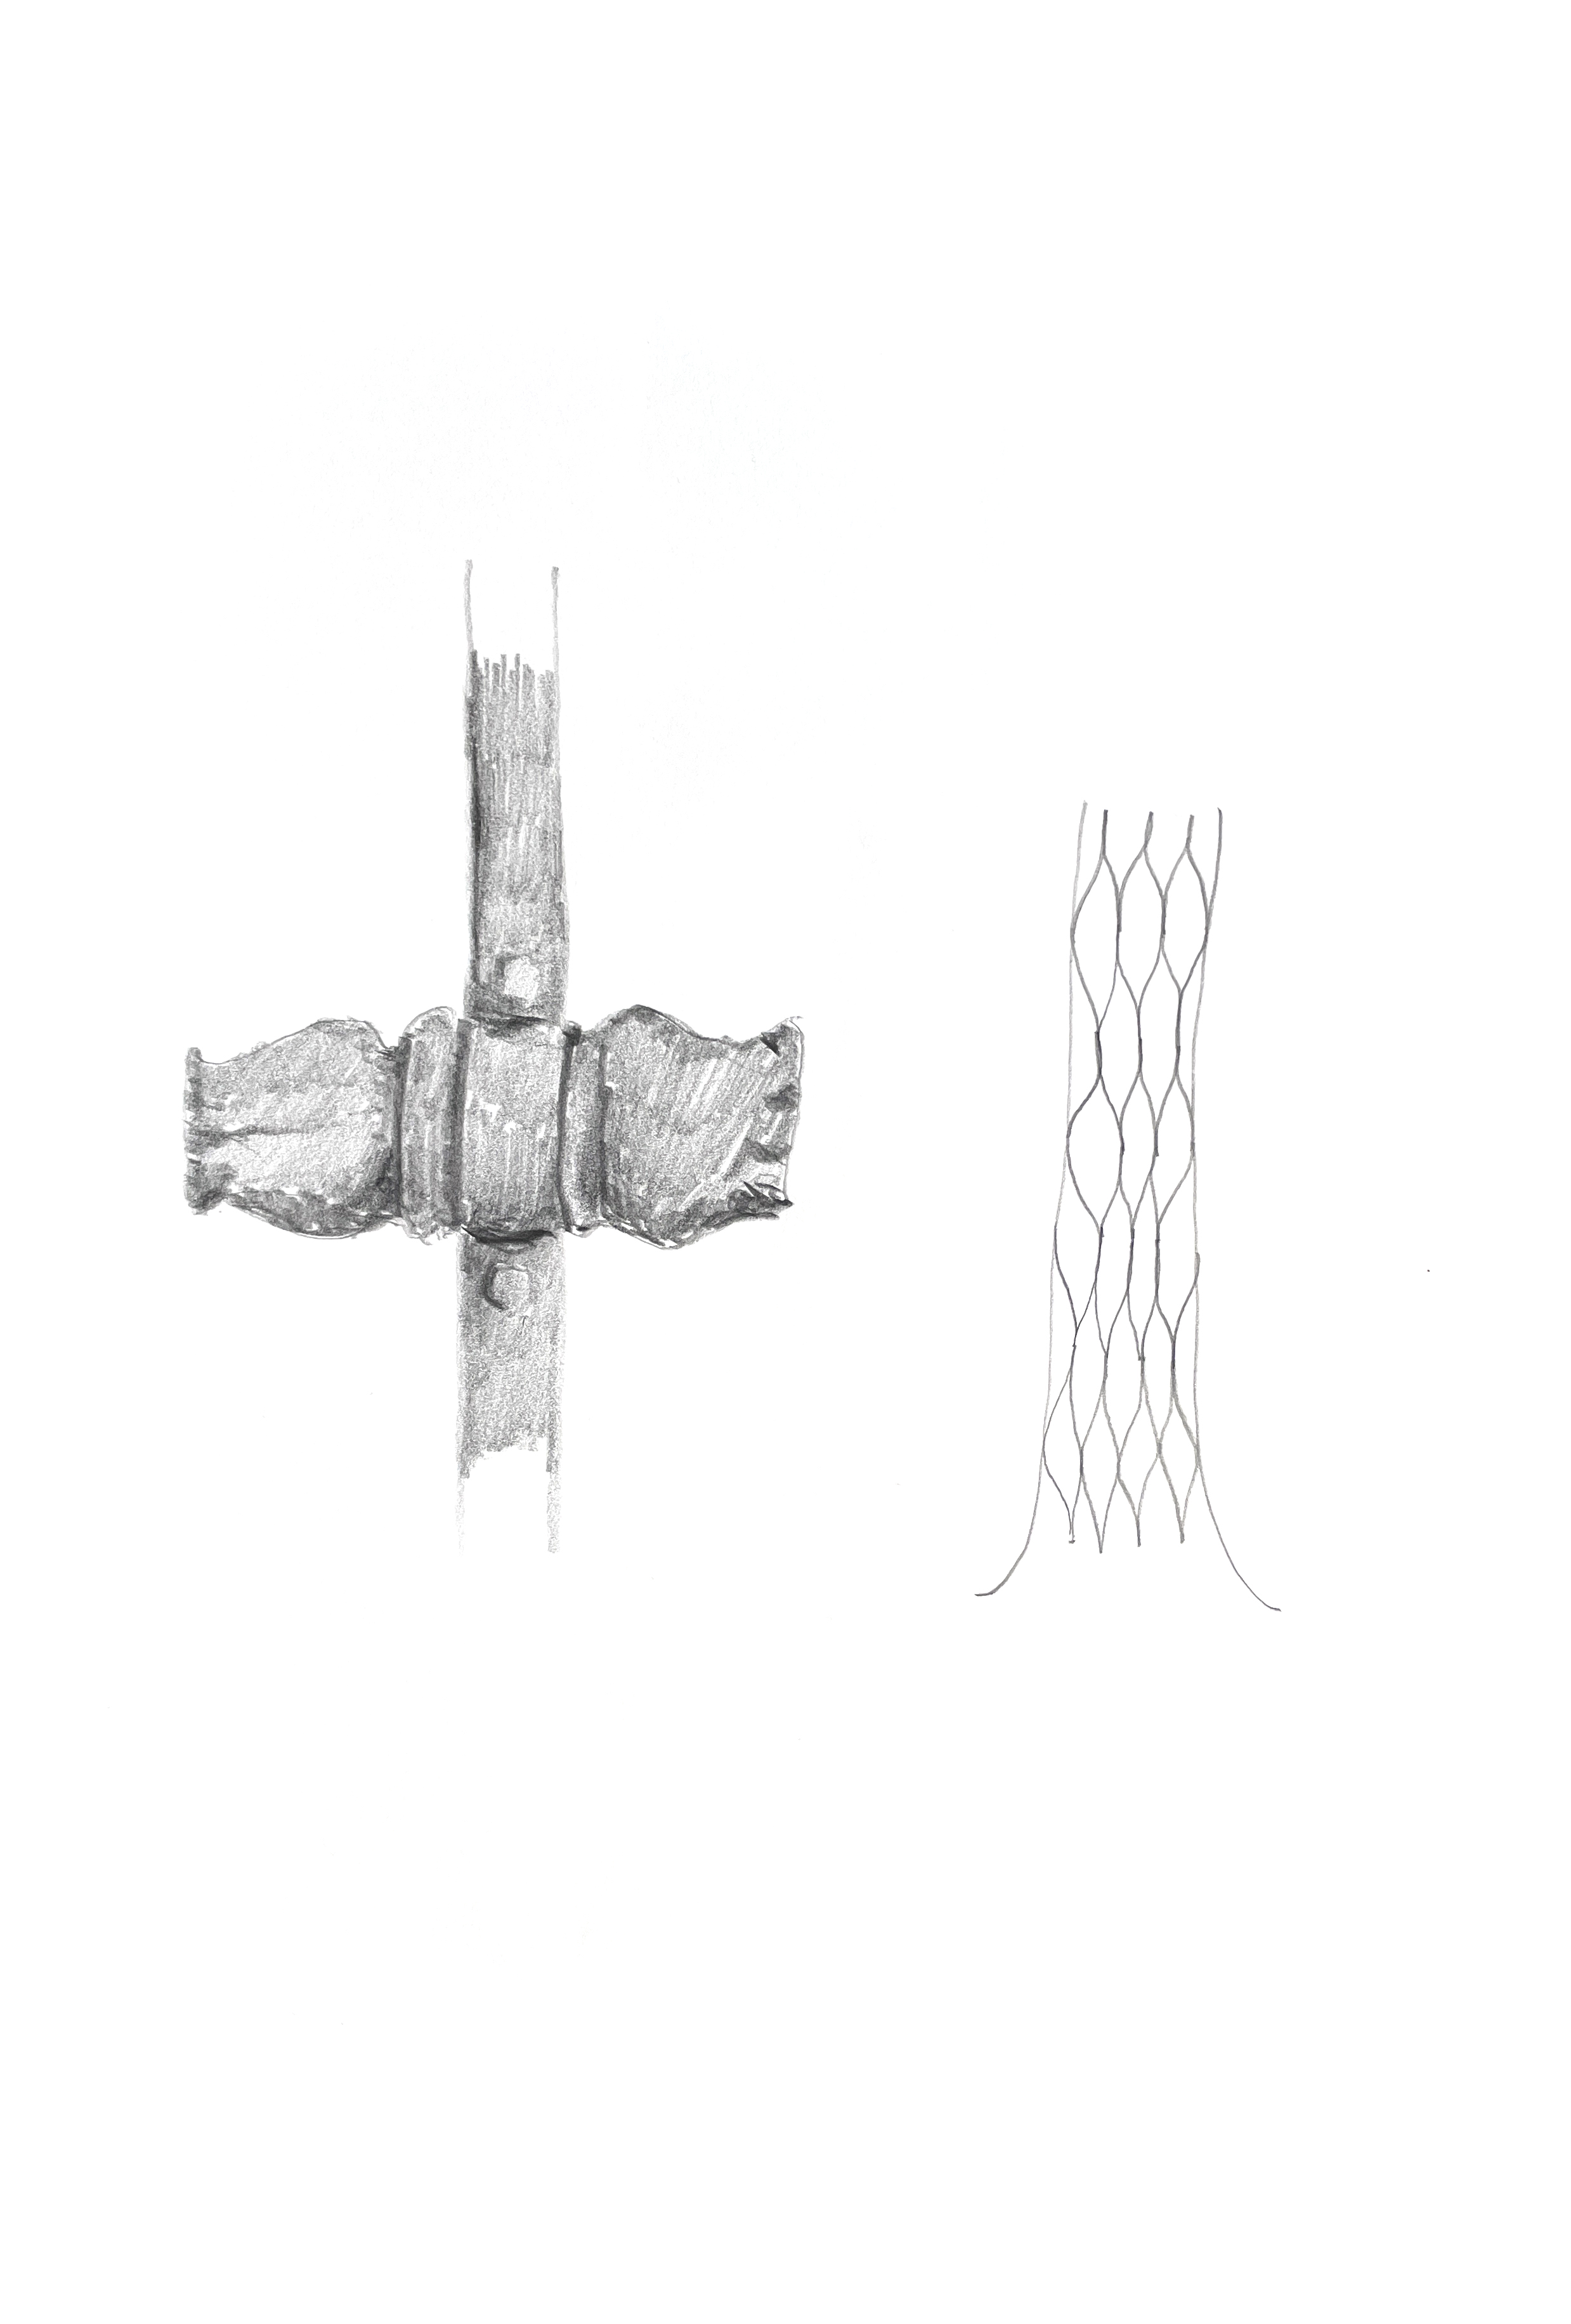 two pencil drawings: on the left part of a metal railing and on the right an abstracted tree trunk with geometric bark